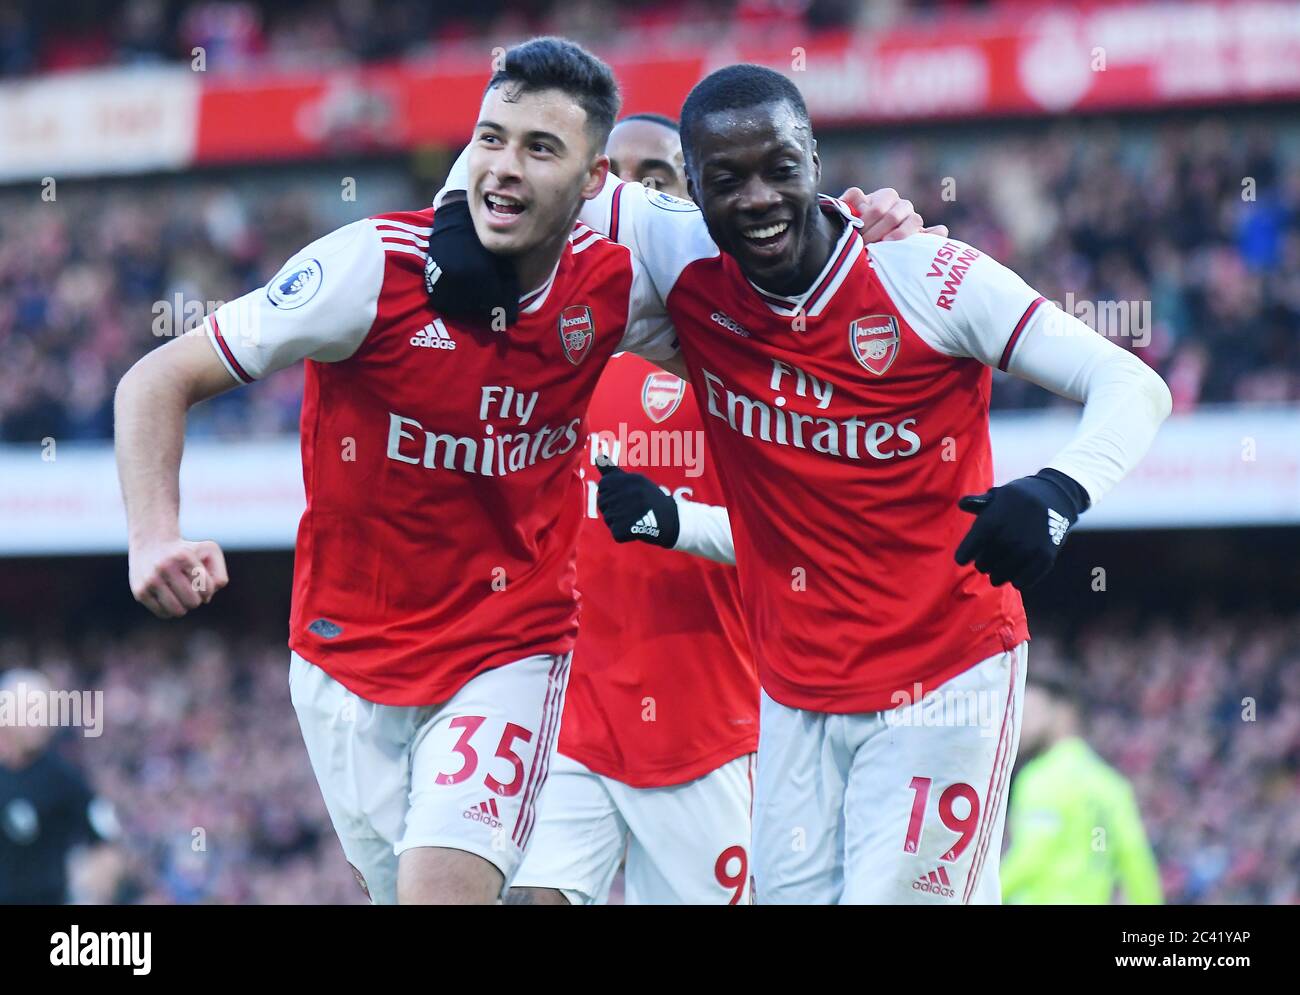 LONDON, ENGLAND - JANUARY 18, 2020: Gabriel Martinelli of Arsenal and Nicolas Pepe of Arsenal celebrate a goal scored during the 2019/20 Premier League game between Arsenal FC and Sheffield United FC at Emirates Stadium. Stock Photo